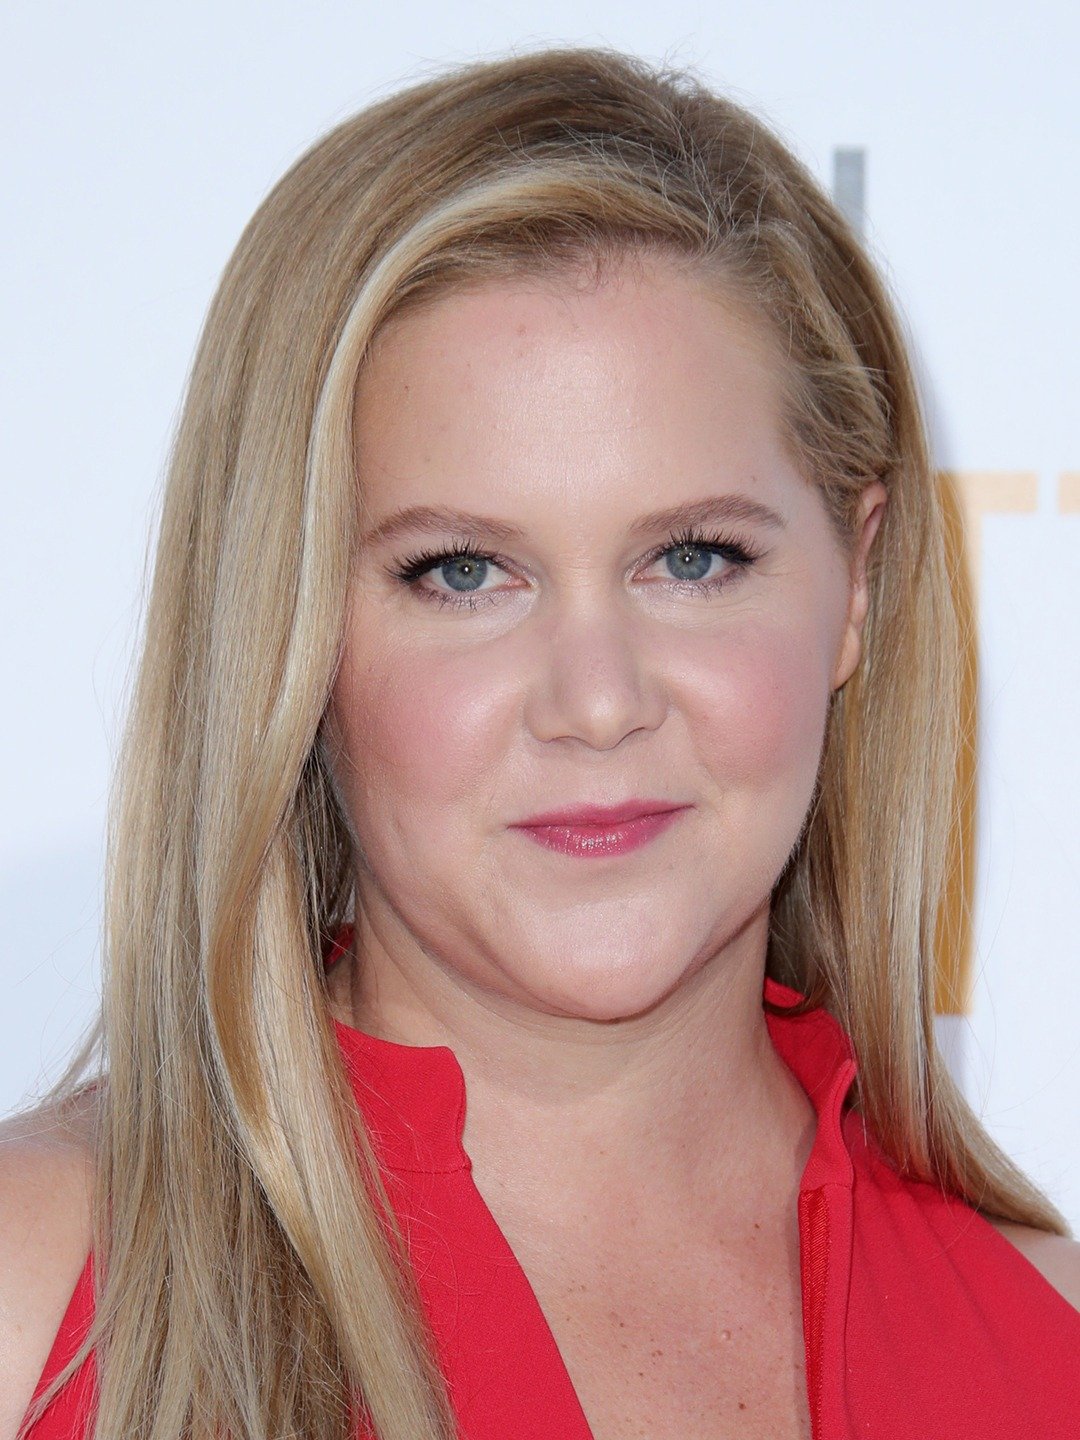 How tall is Amy Schumer?